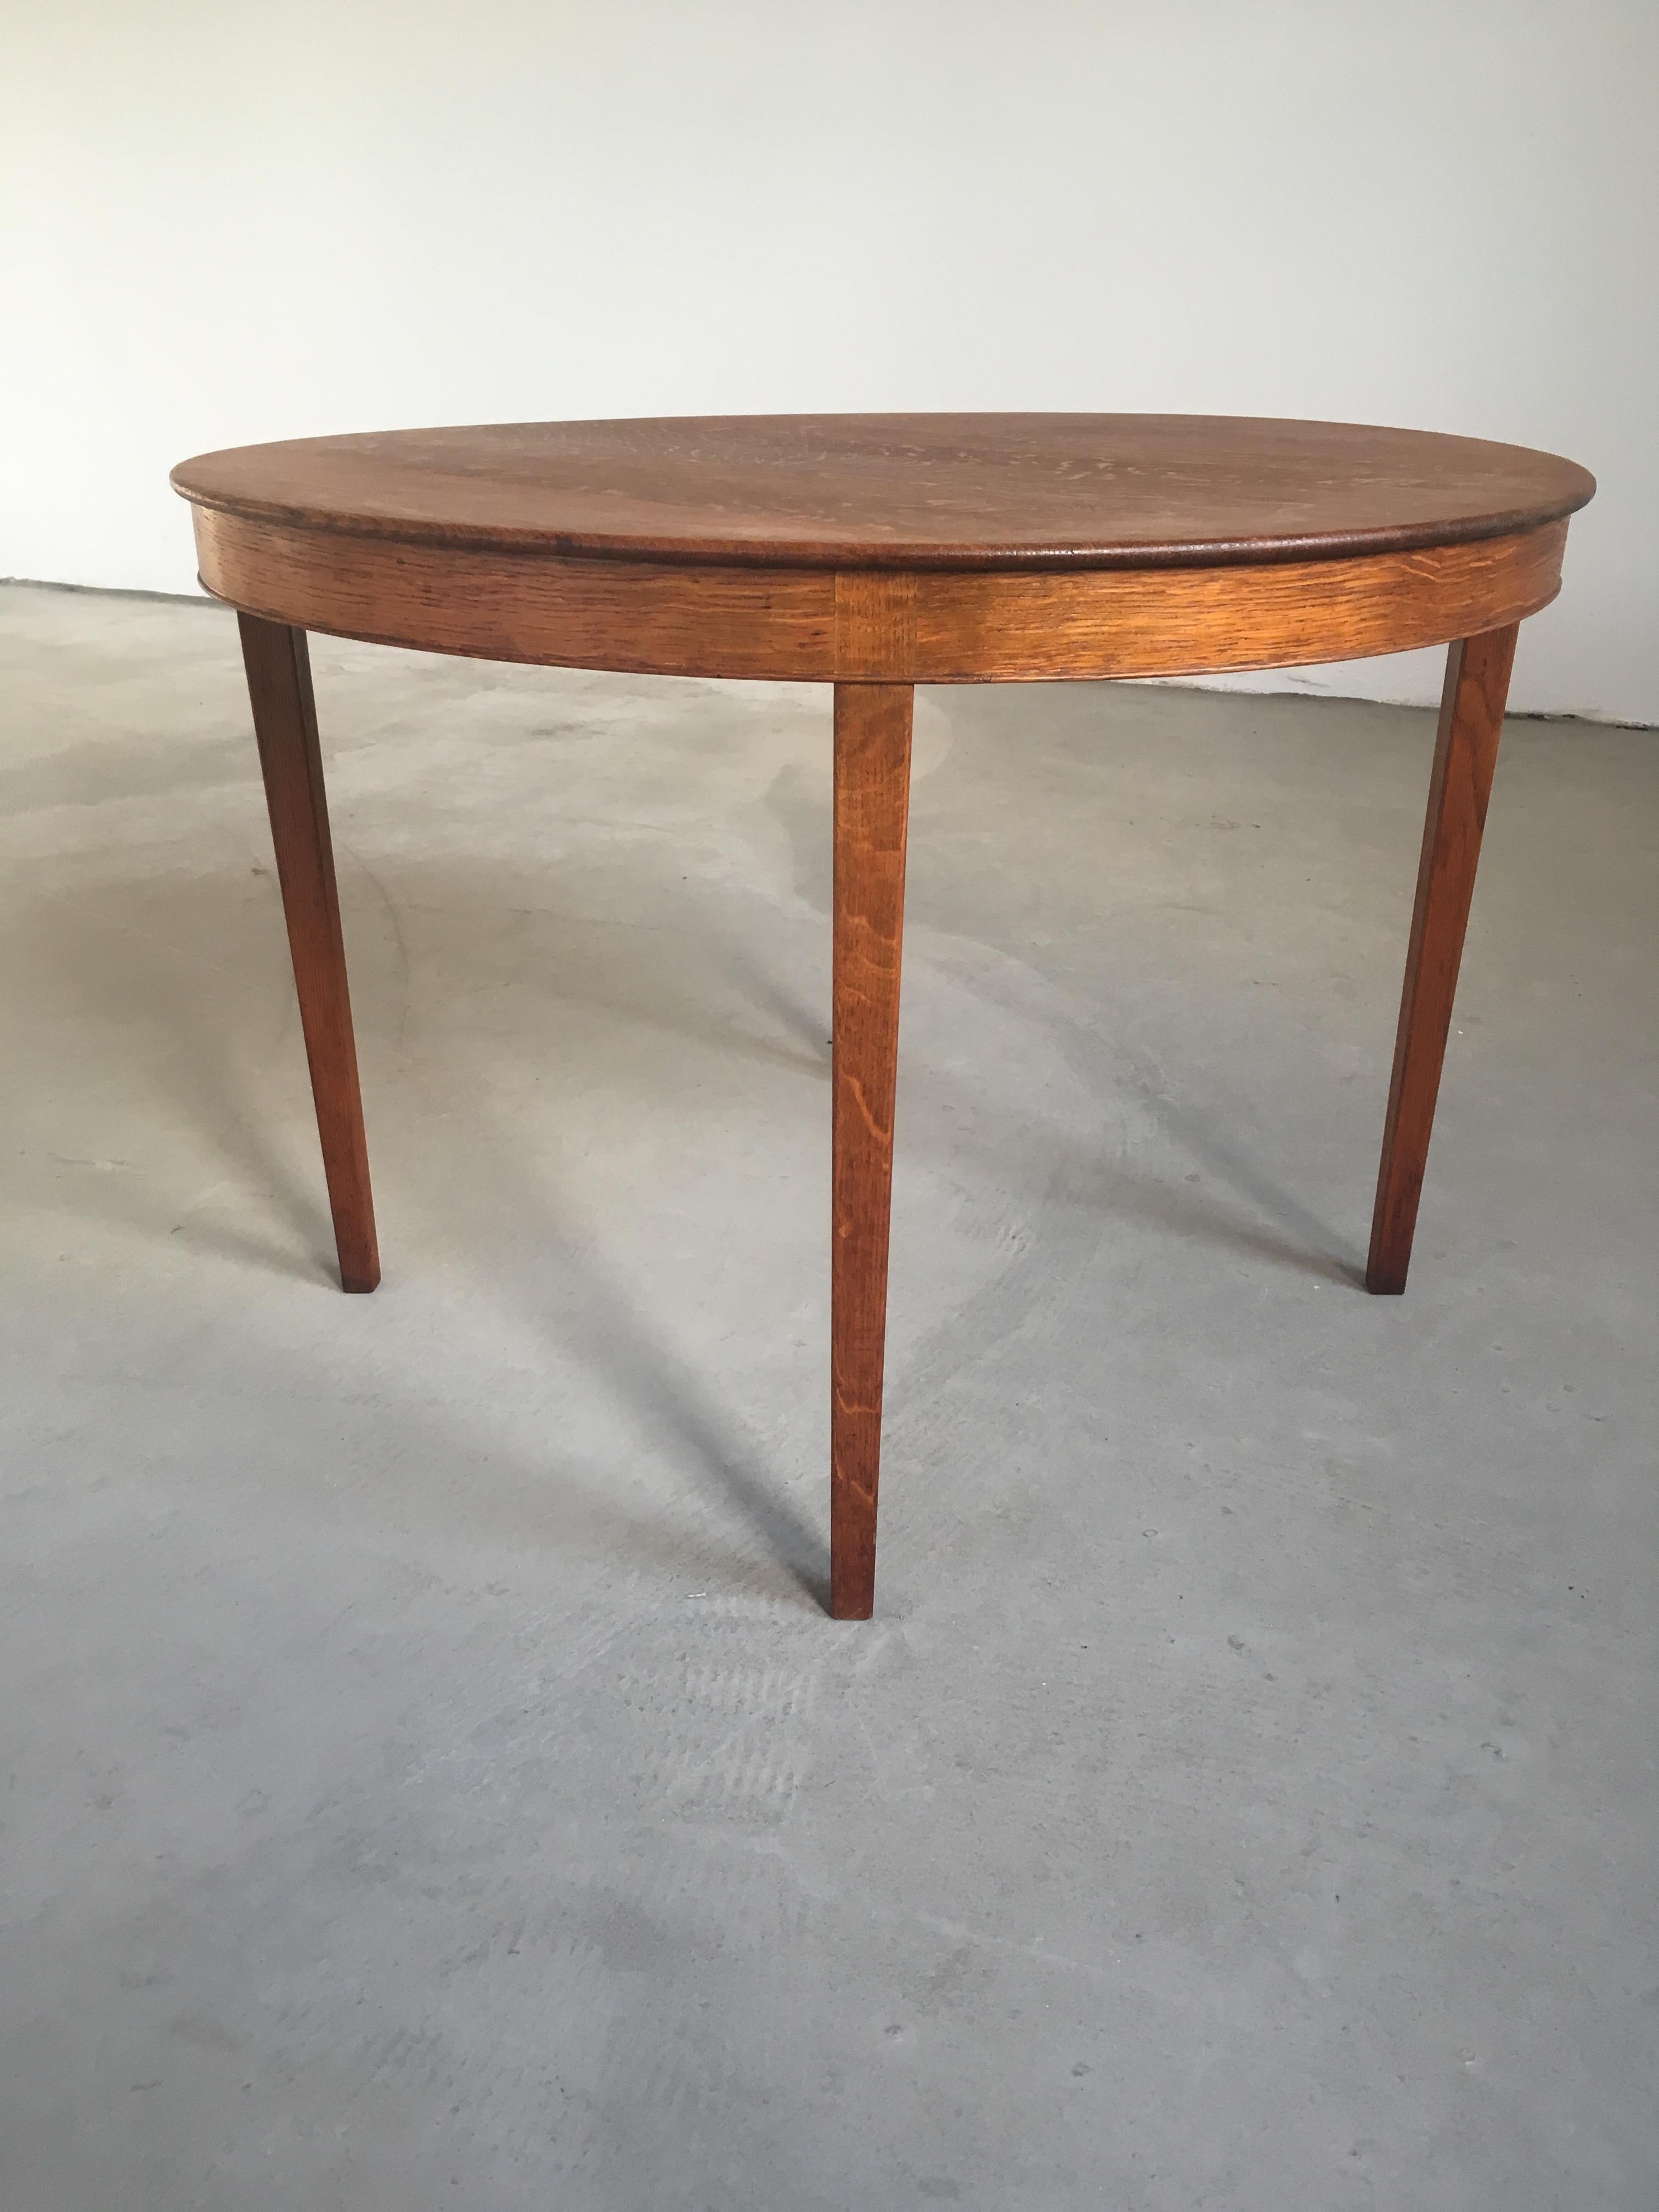 1940s Danish A.J. Iversen Coffee Table in Oak

The circular coffee table in oak was ordered as a wedding present at A.J. Iversen in 1946 

The coffee table has been checked by our cabinetmaker and is in very good condition.